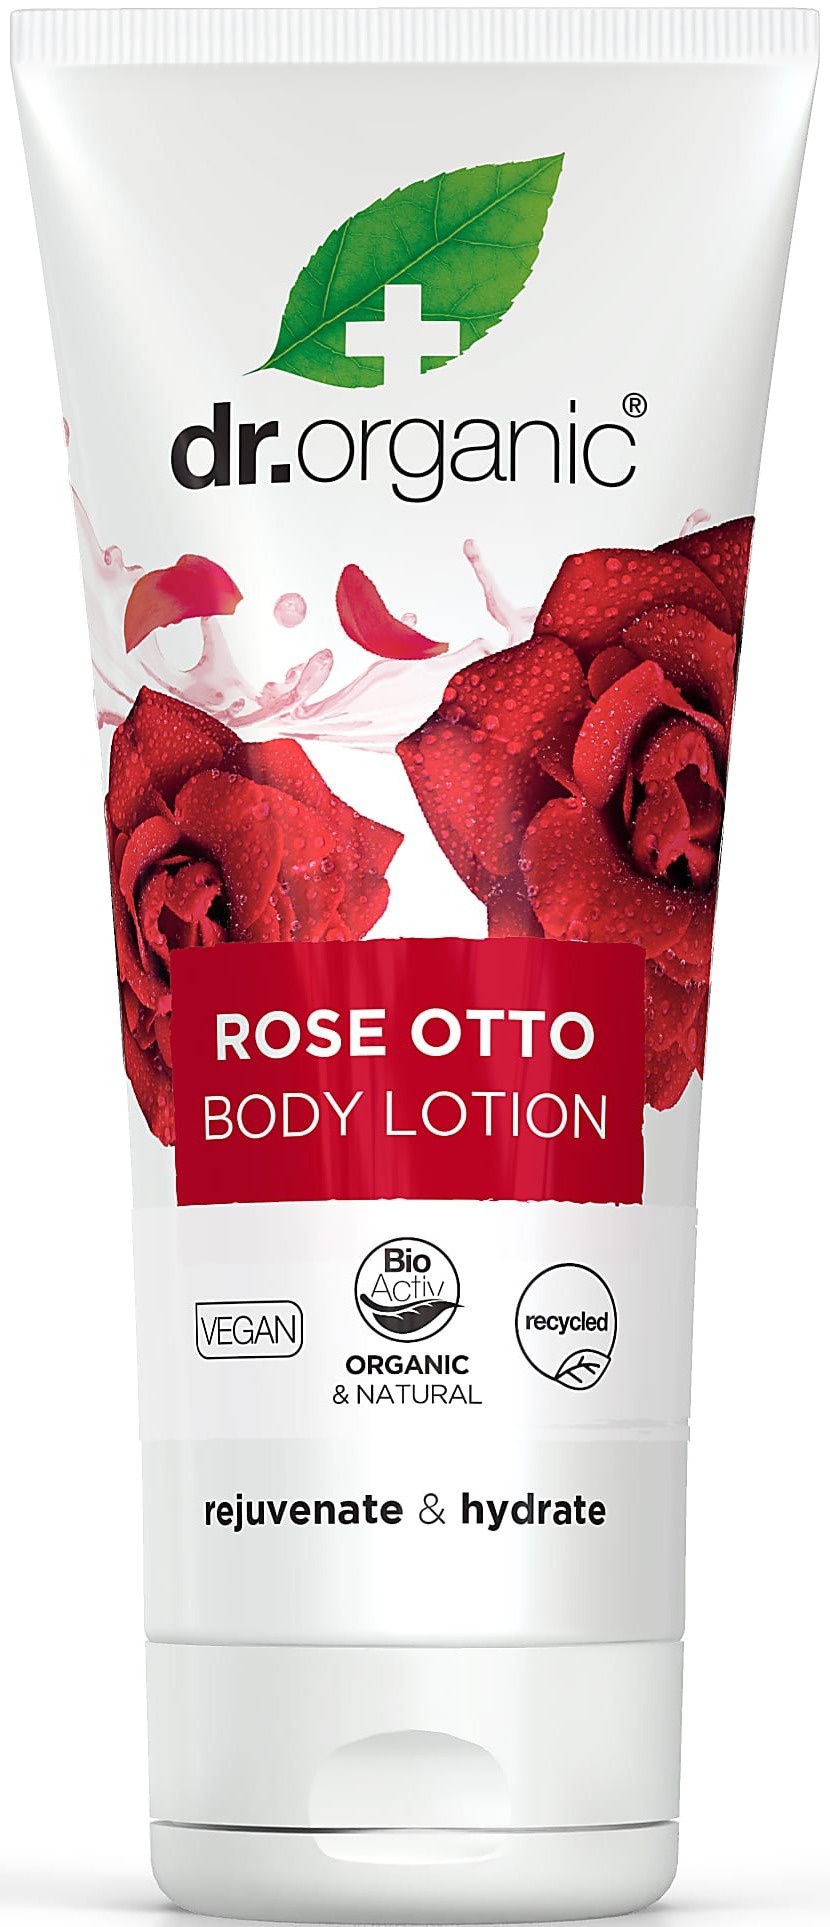 Dr Organic Rose Otto Body Lotion